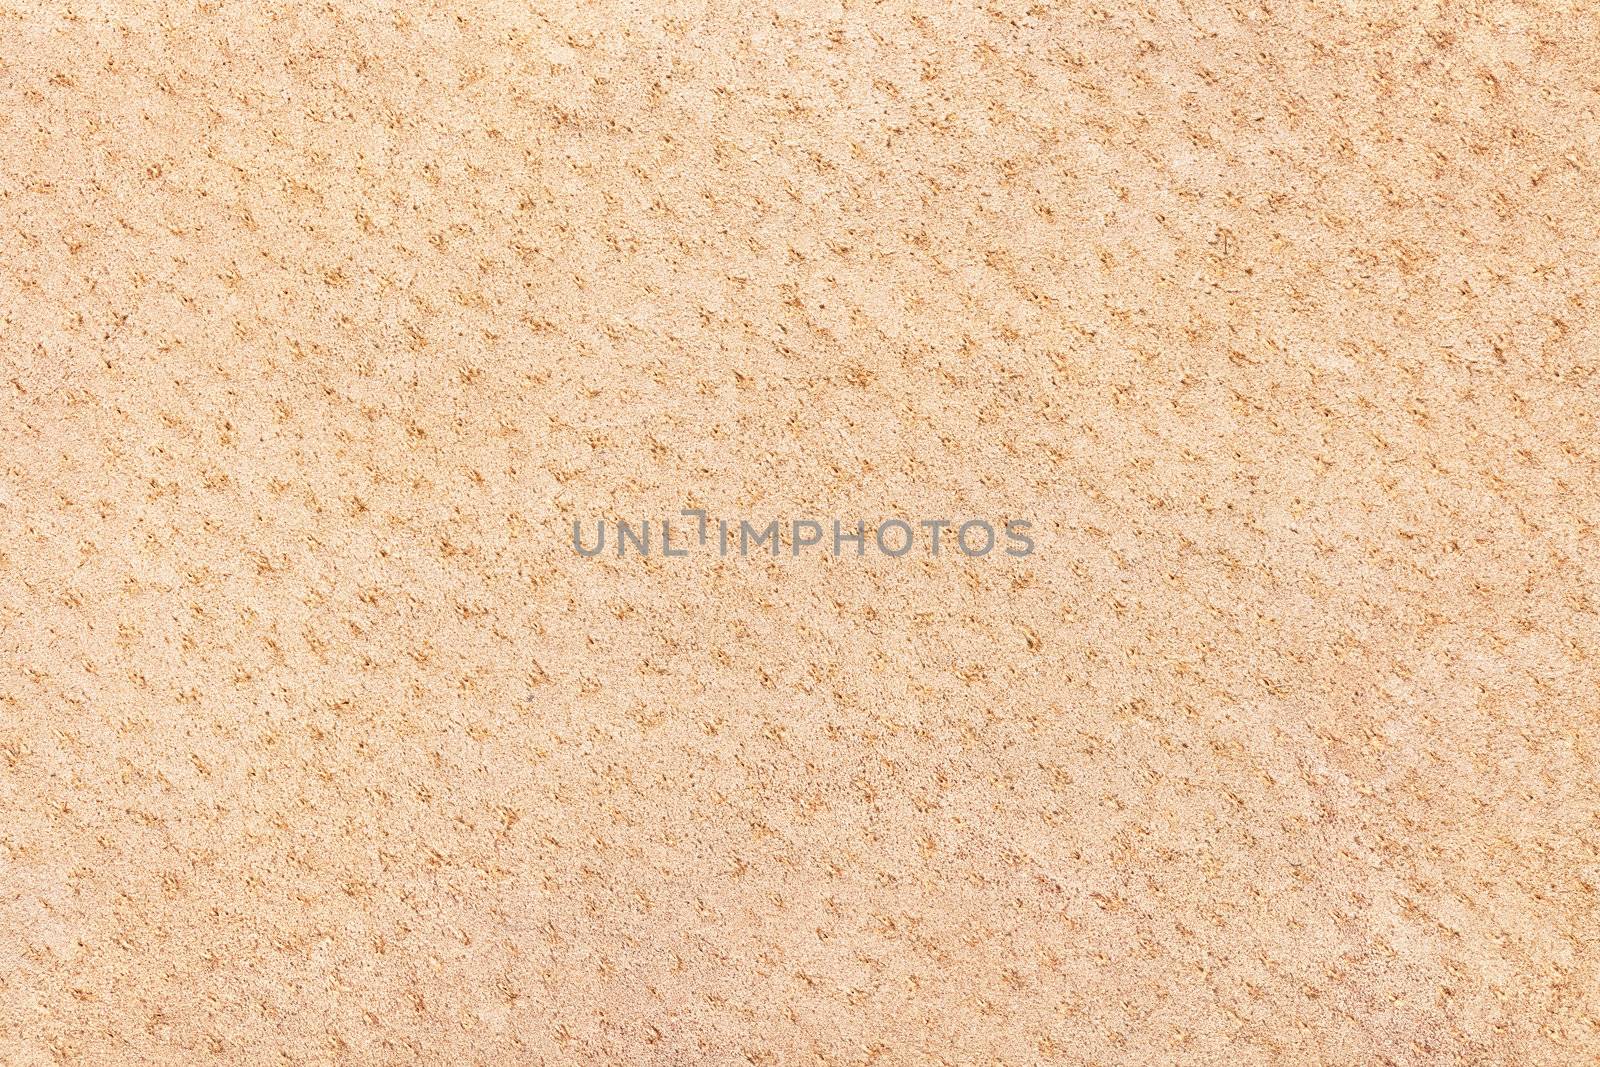 Beige leather texture or background. Macro shot, top view